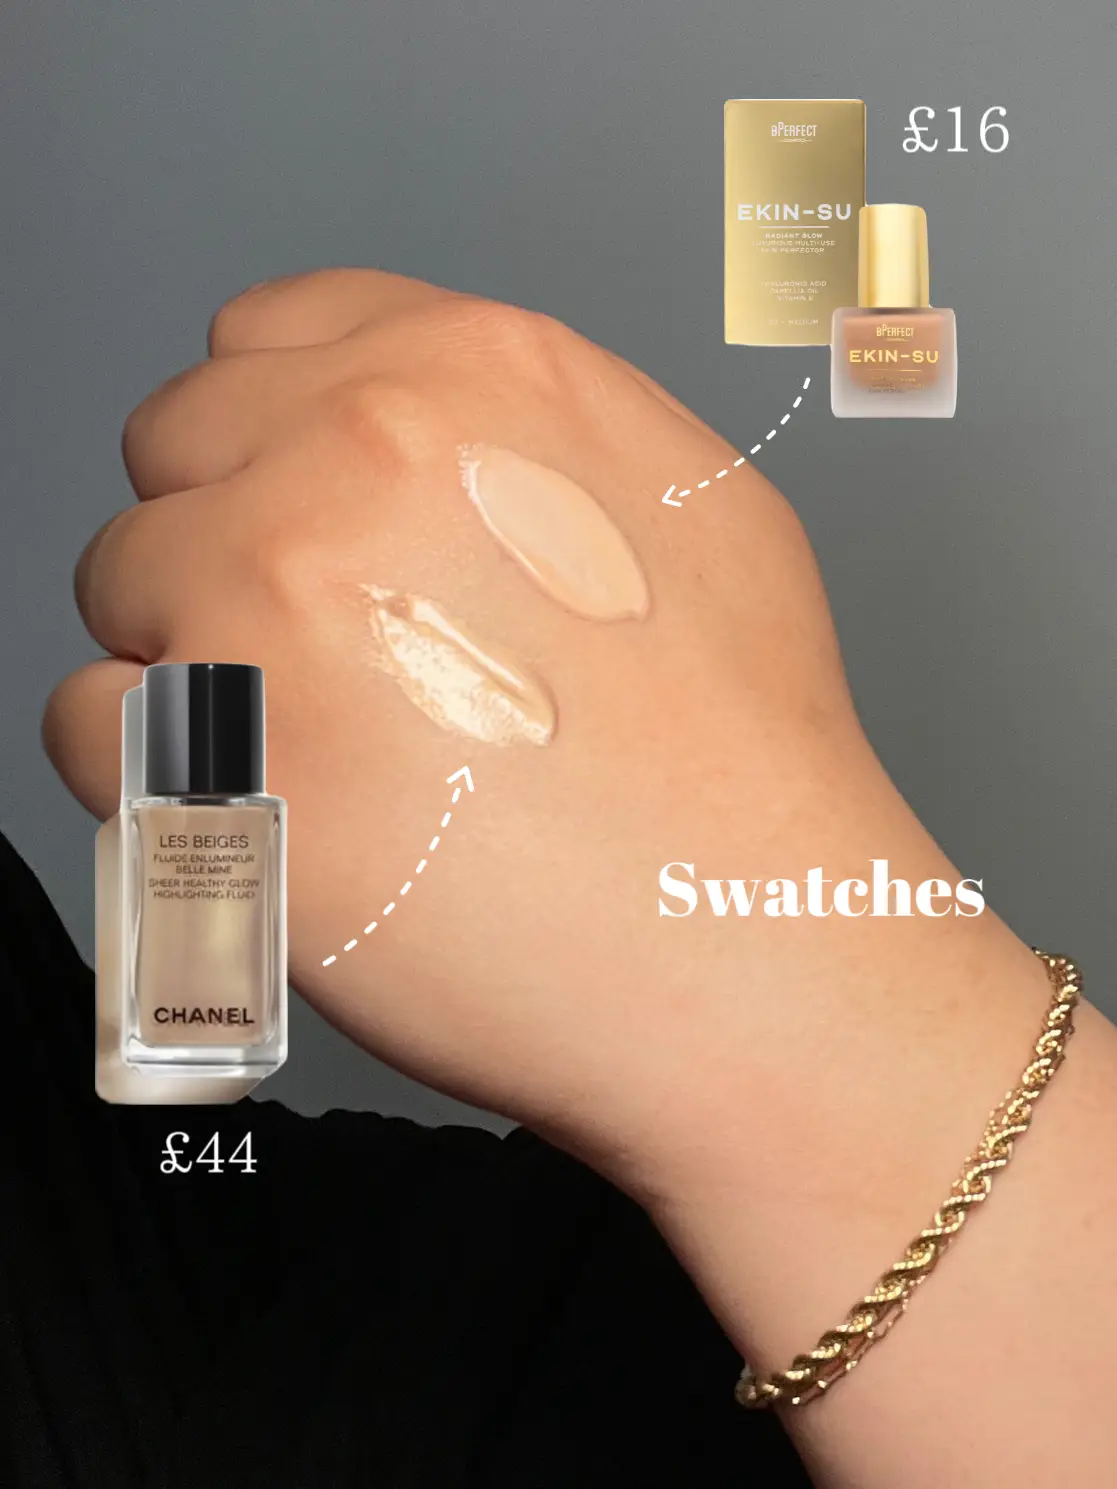 CHANEL (LES BEIGES) Healthy Glow Sheer Highlighting Fluid